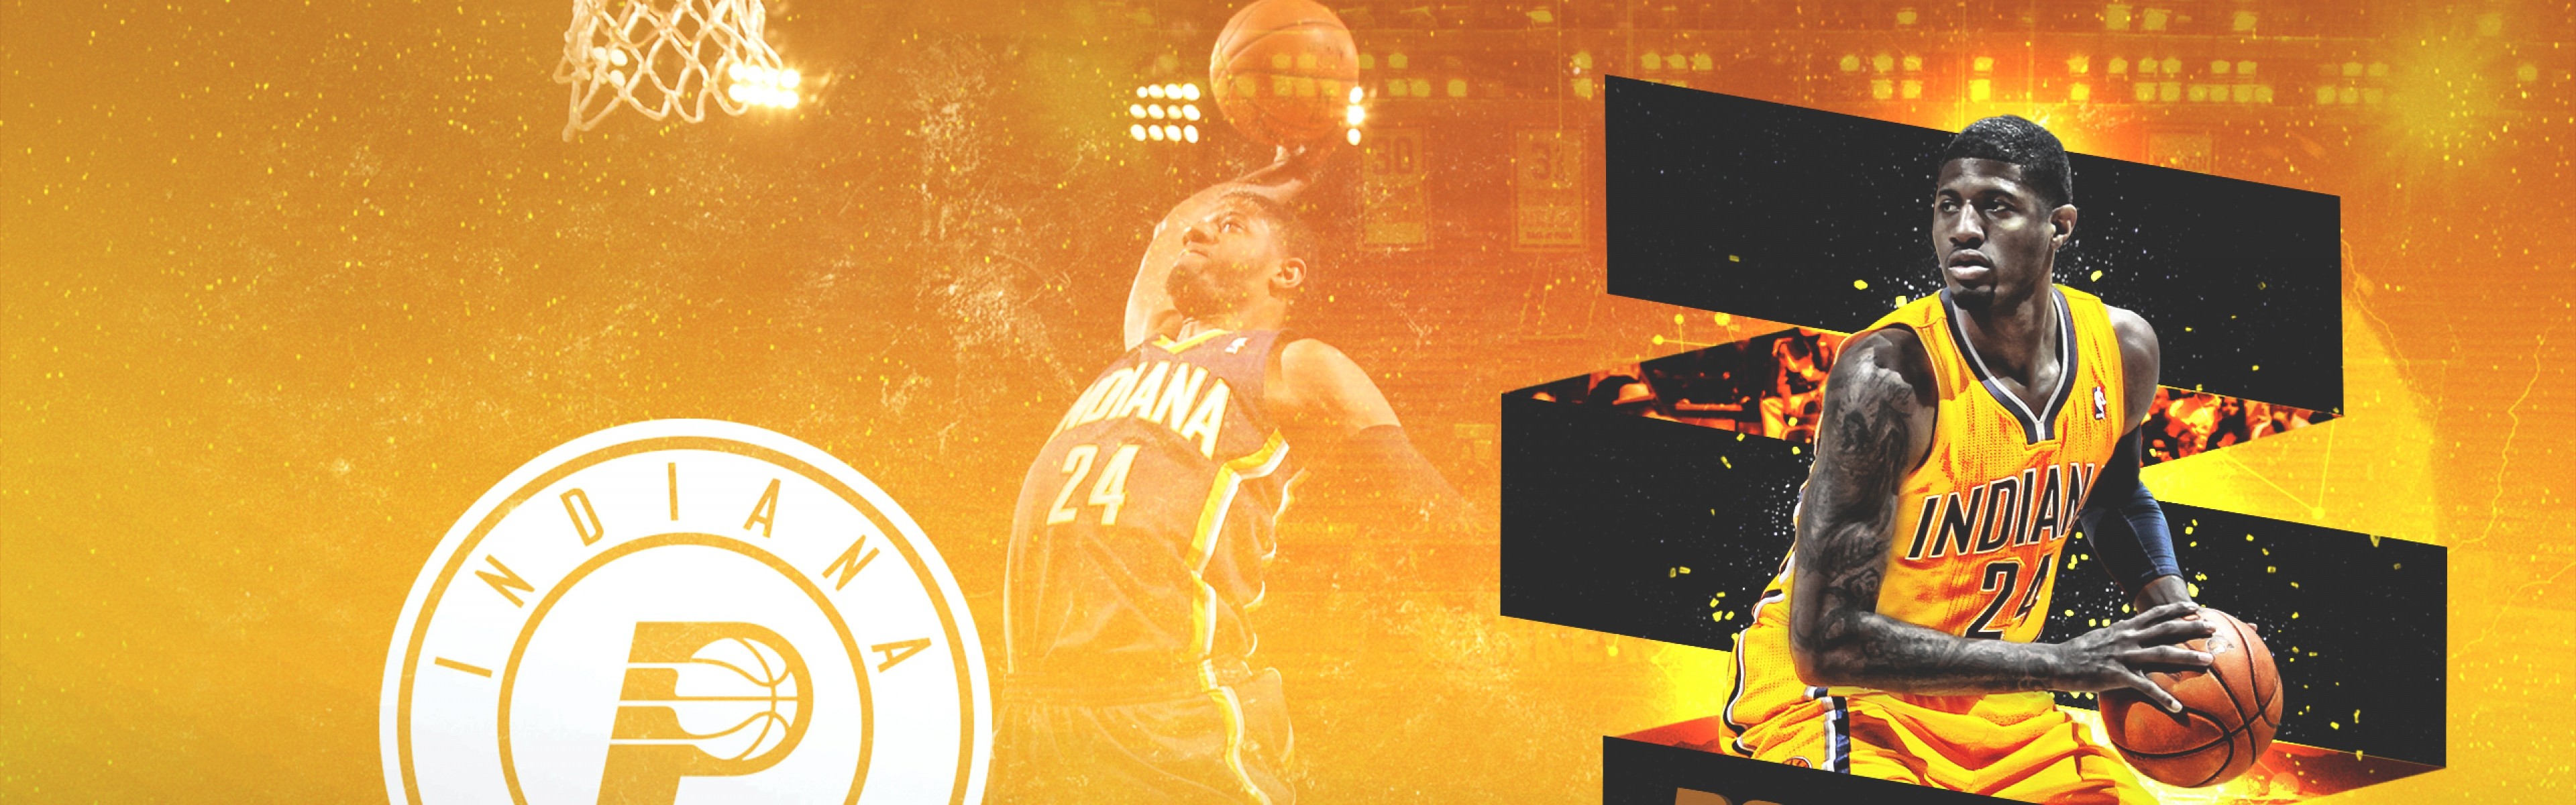 3840x1200 Download Wallpaper  paul george indiana pacers basketball 